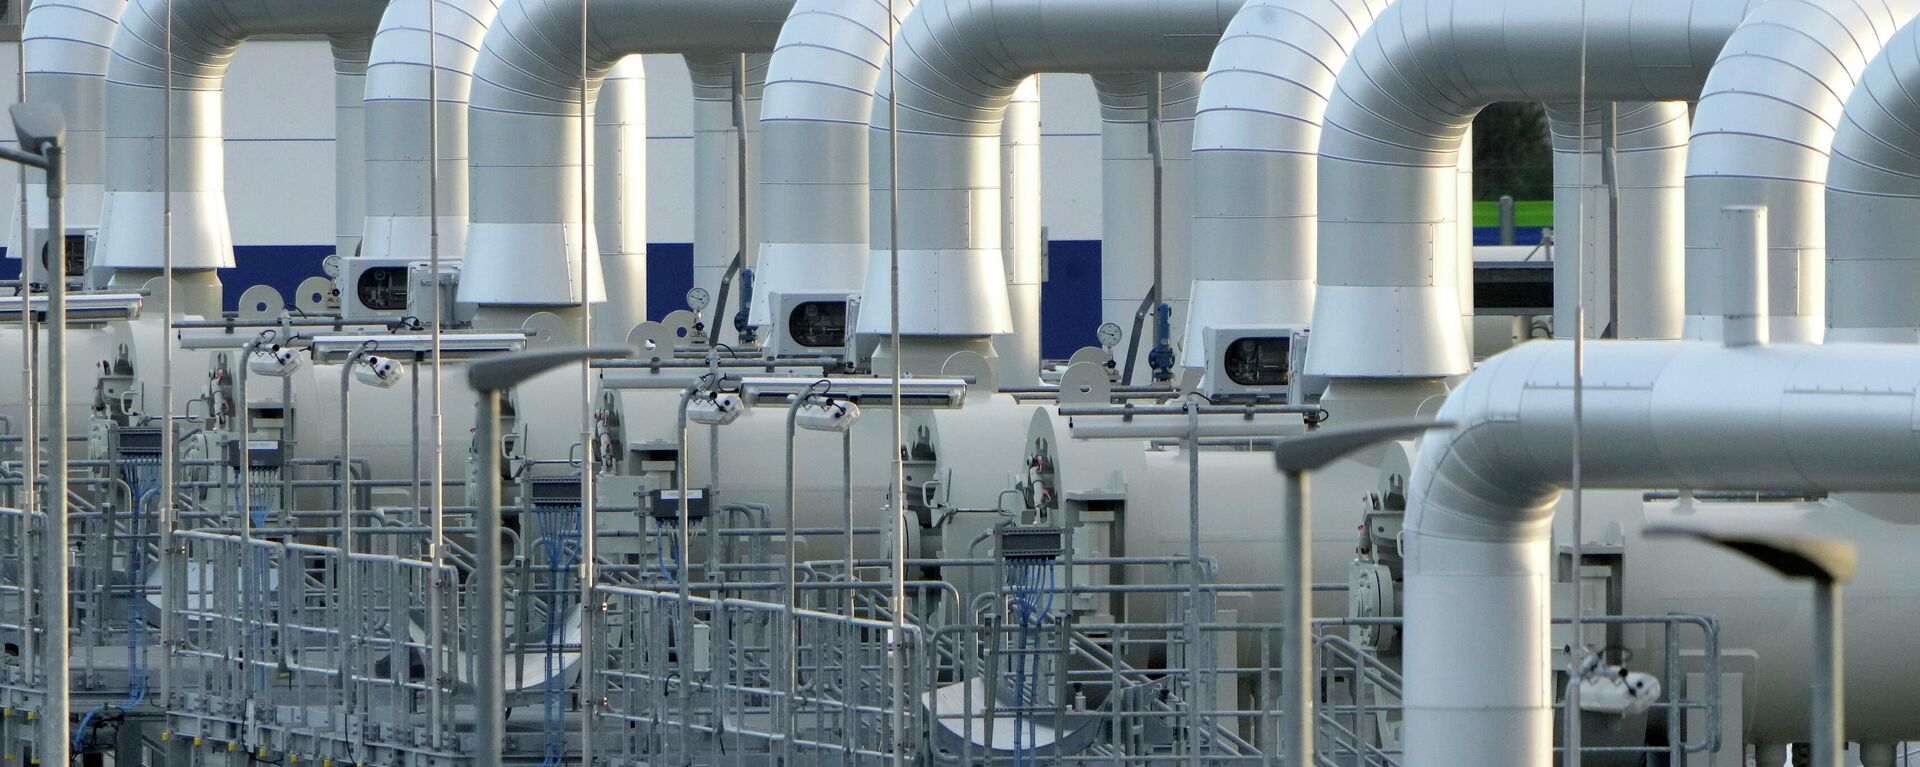 FILE - Pipes at the landfall facilities of the 'Nord Stream 2' gas pipline are pictured in Lubmin, northern Germany, Tuesday, Feb. 15, 2022 - Sputnik International, 1920, 28.07.2022